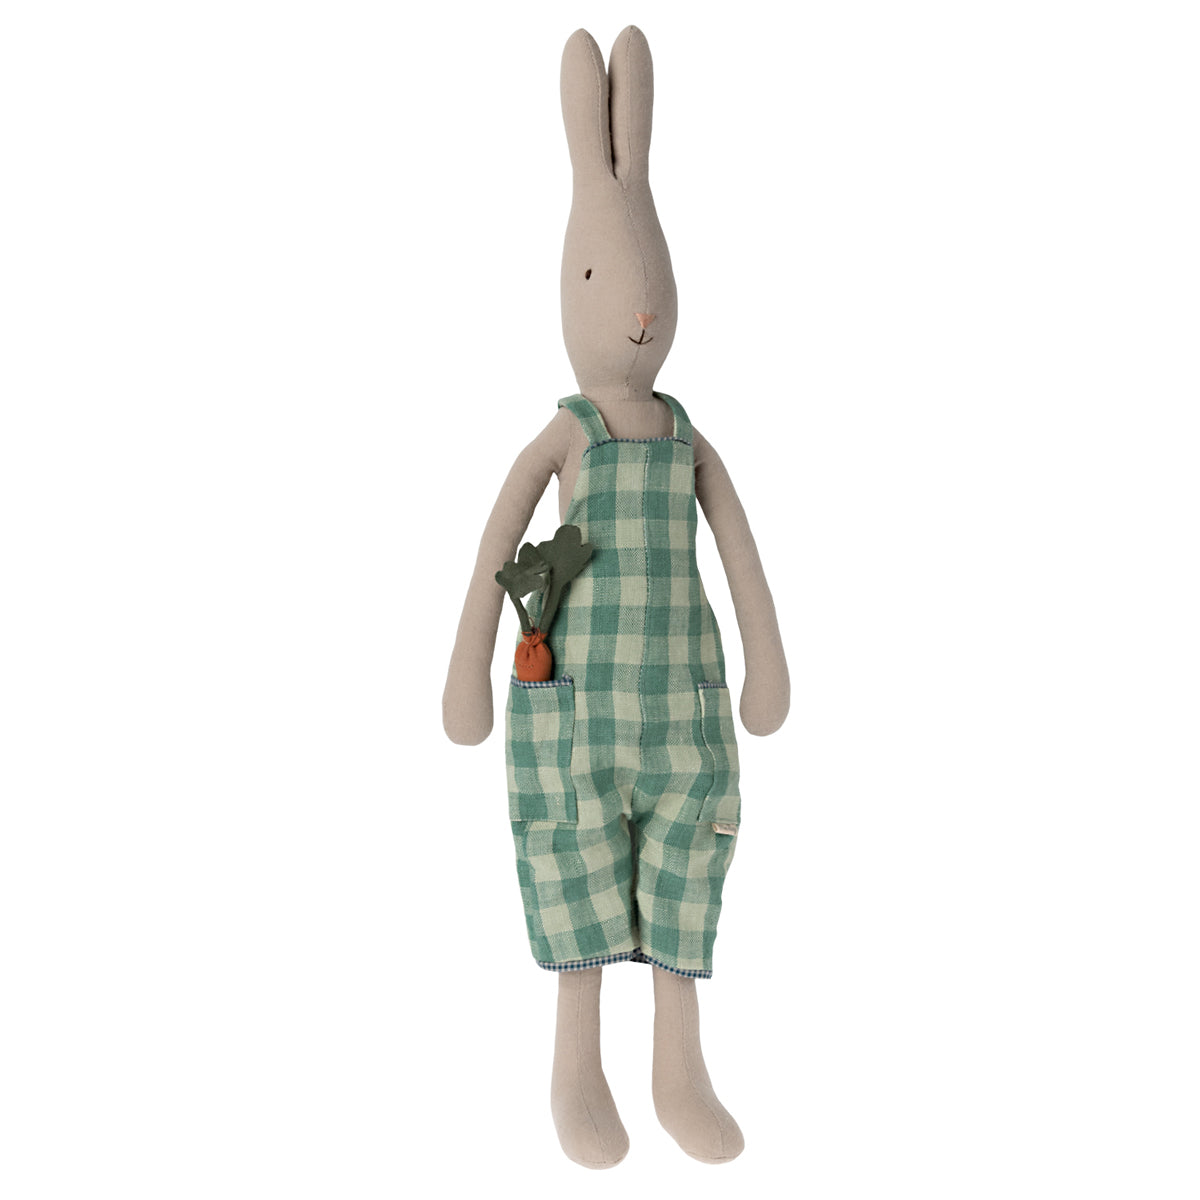 Rabbit size 3 Overall